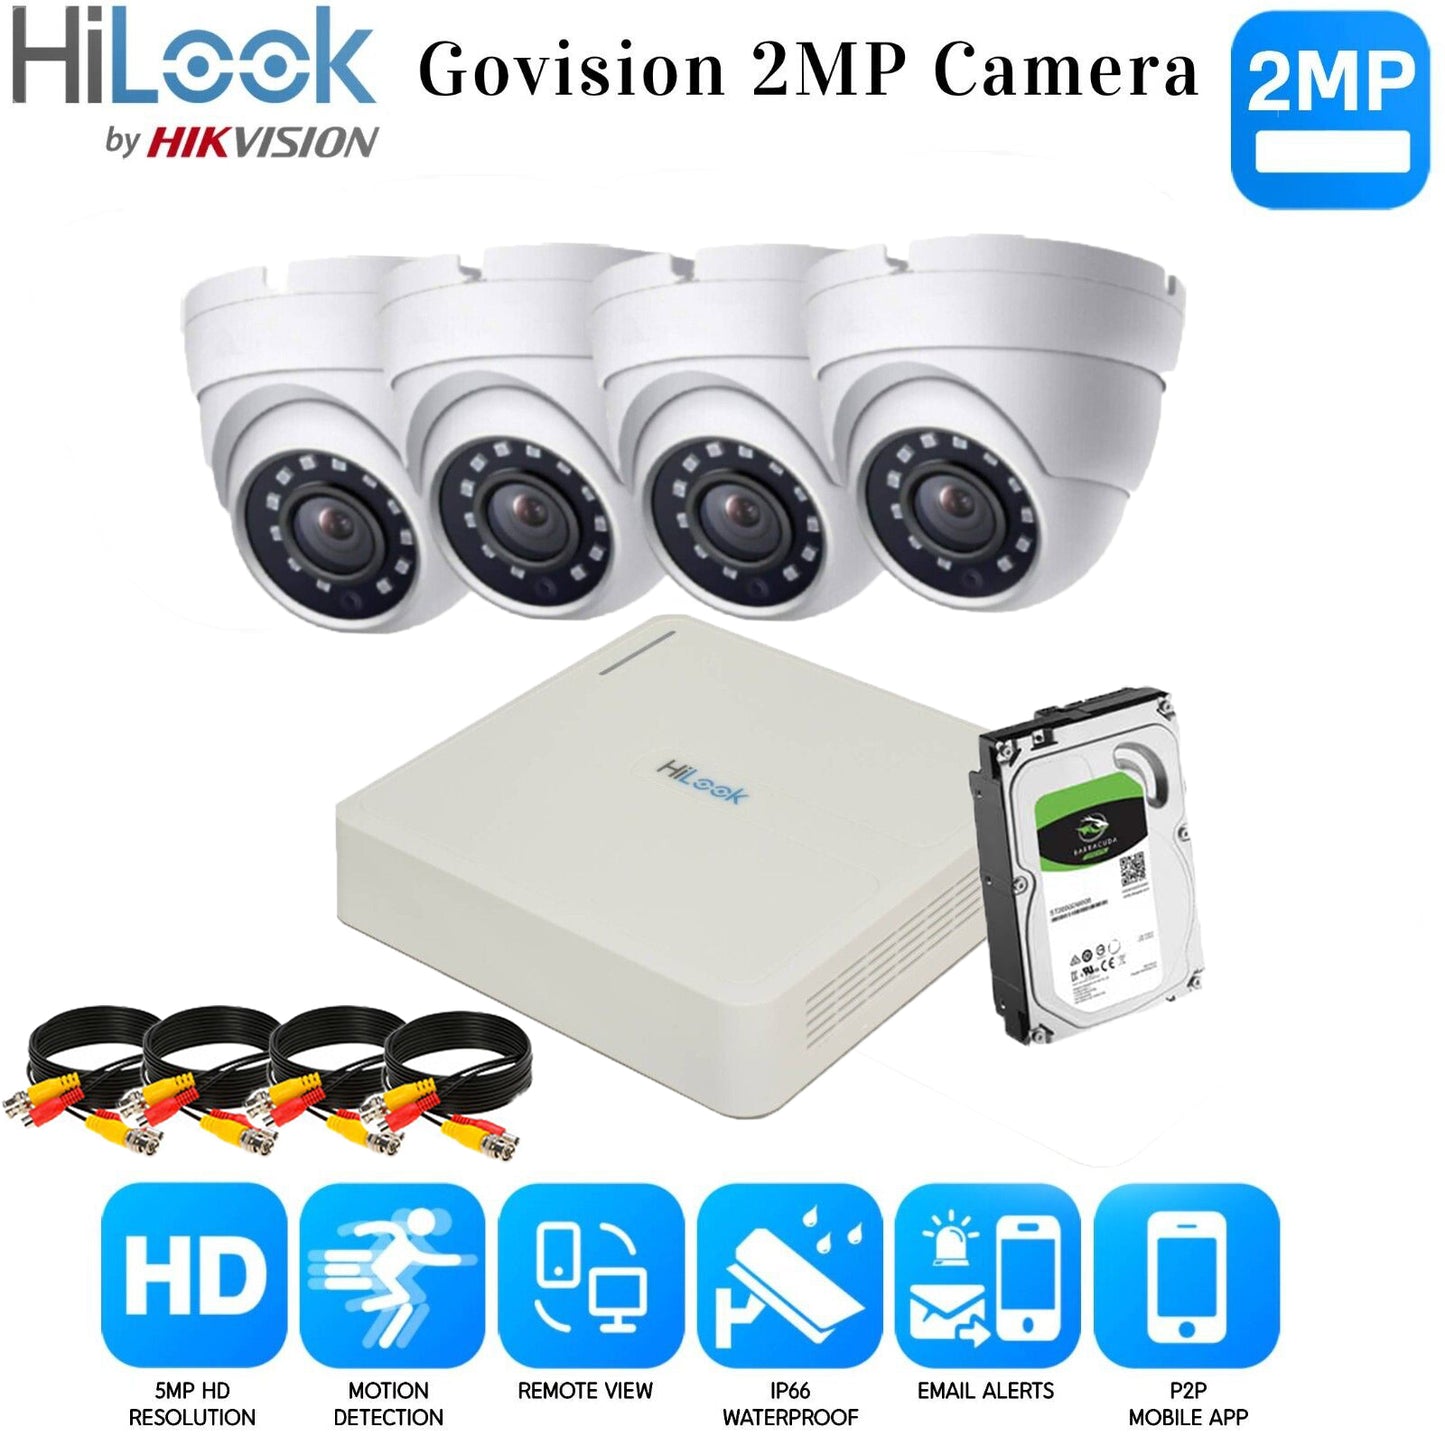 Hikvision Home Outdoor CCTV Security Camera System Kit HD 1080P 4CH DVR IR NIGHT 8CH DVR 4xCameras (white) 1TB HDD